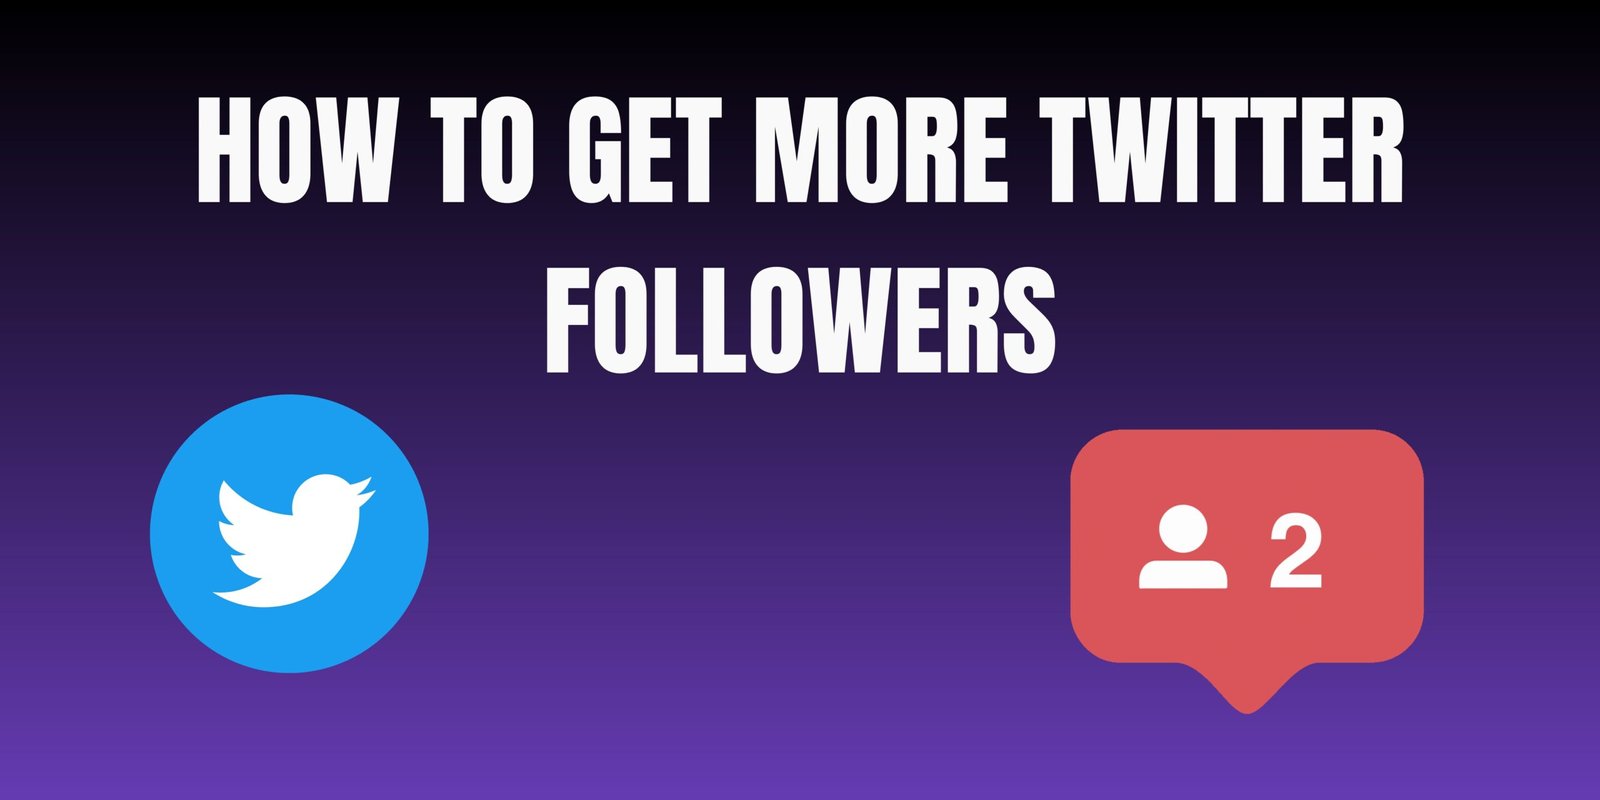 How to Get More Twitter Followers